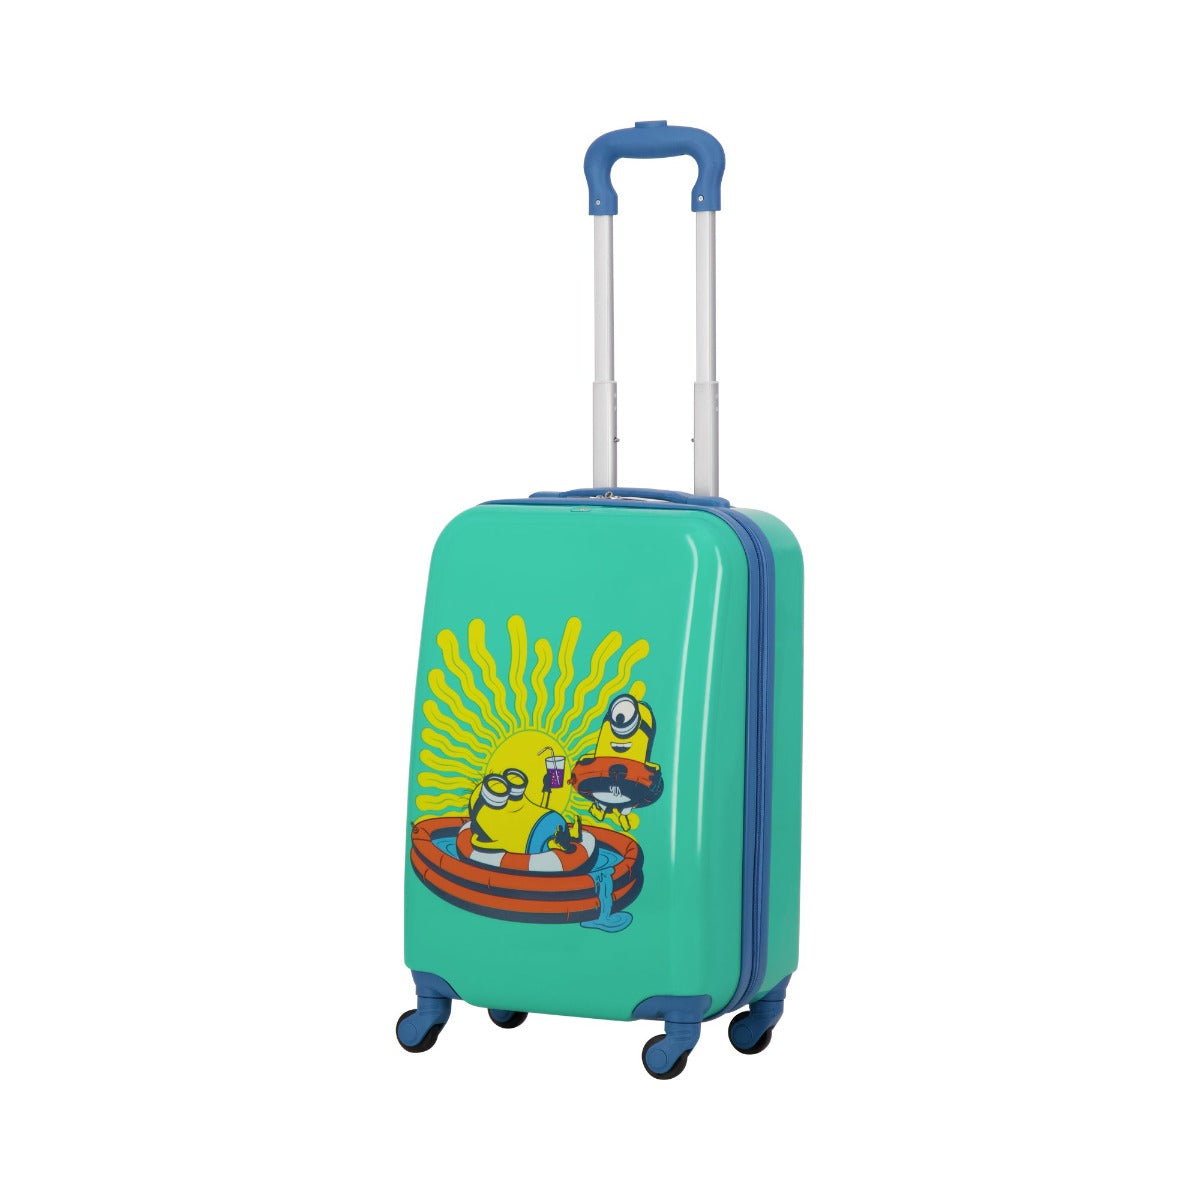 Ful Minions Vacation 21" carry-on hardside spinner suitcase for kids